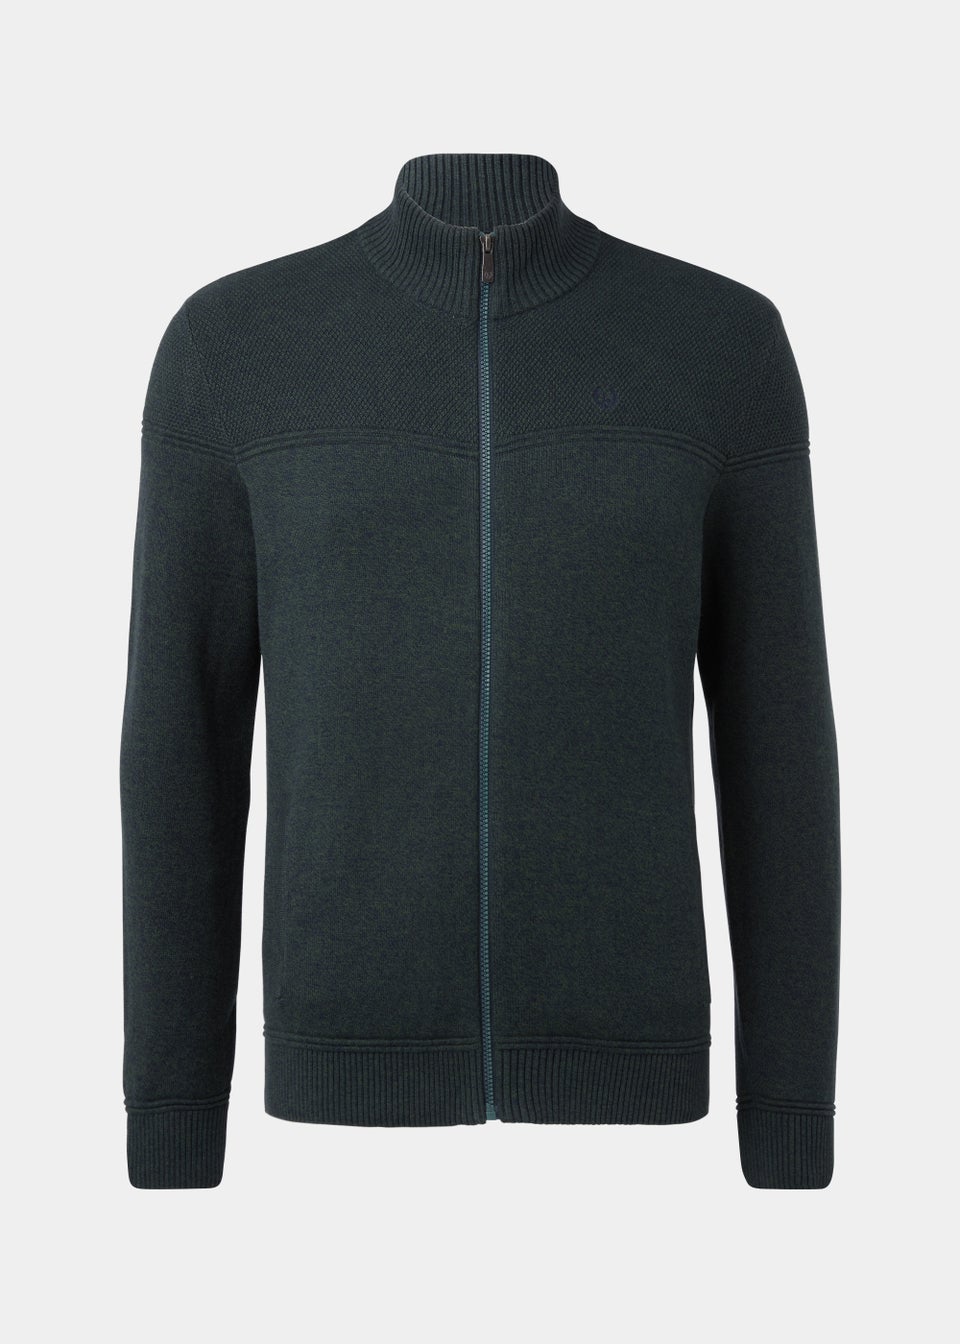 Lincoln Green Funnel Neck Zip Up Jumper